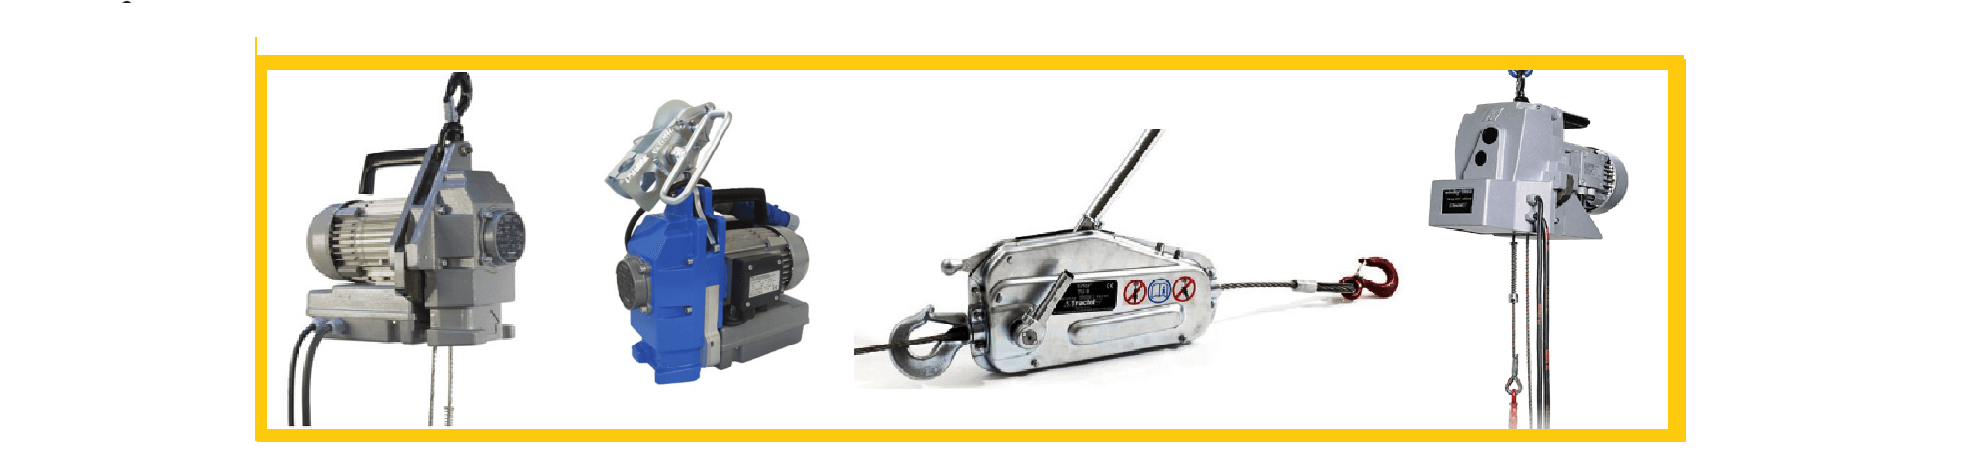 Minifor & Tirfor collection from Lifting Hoists Direct